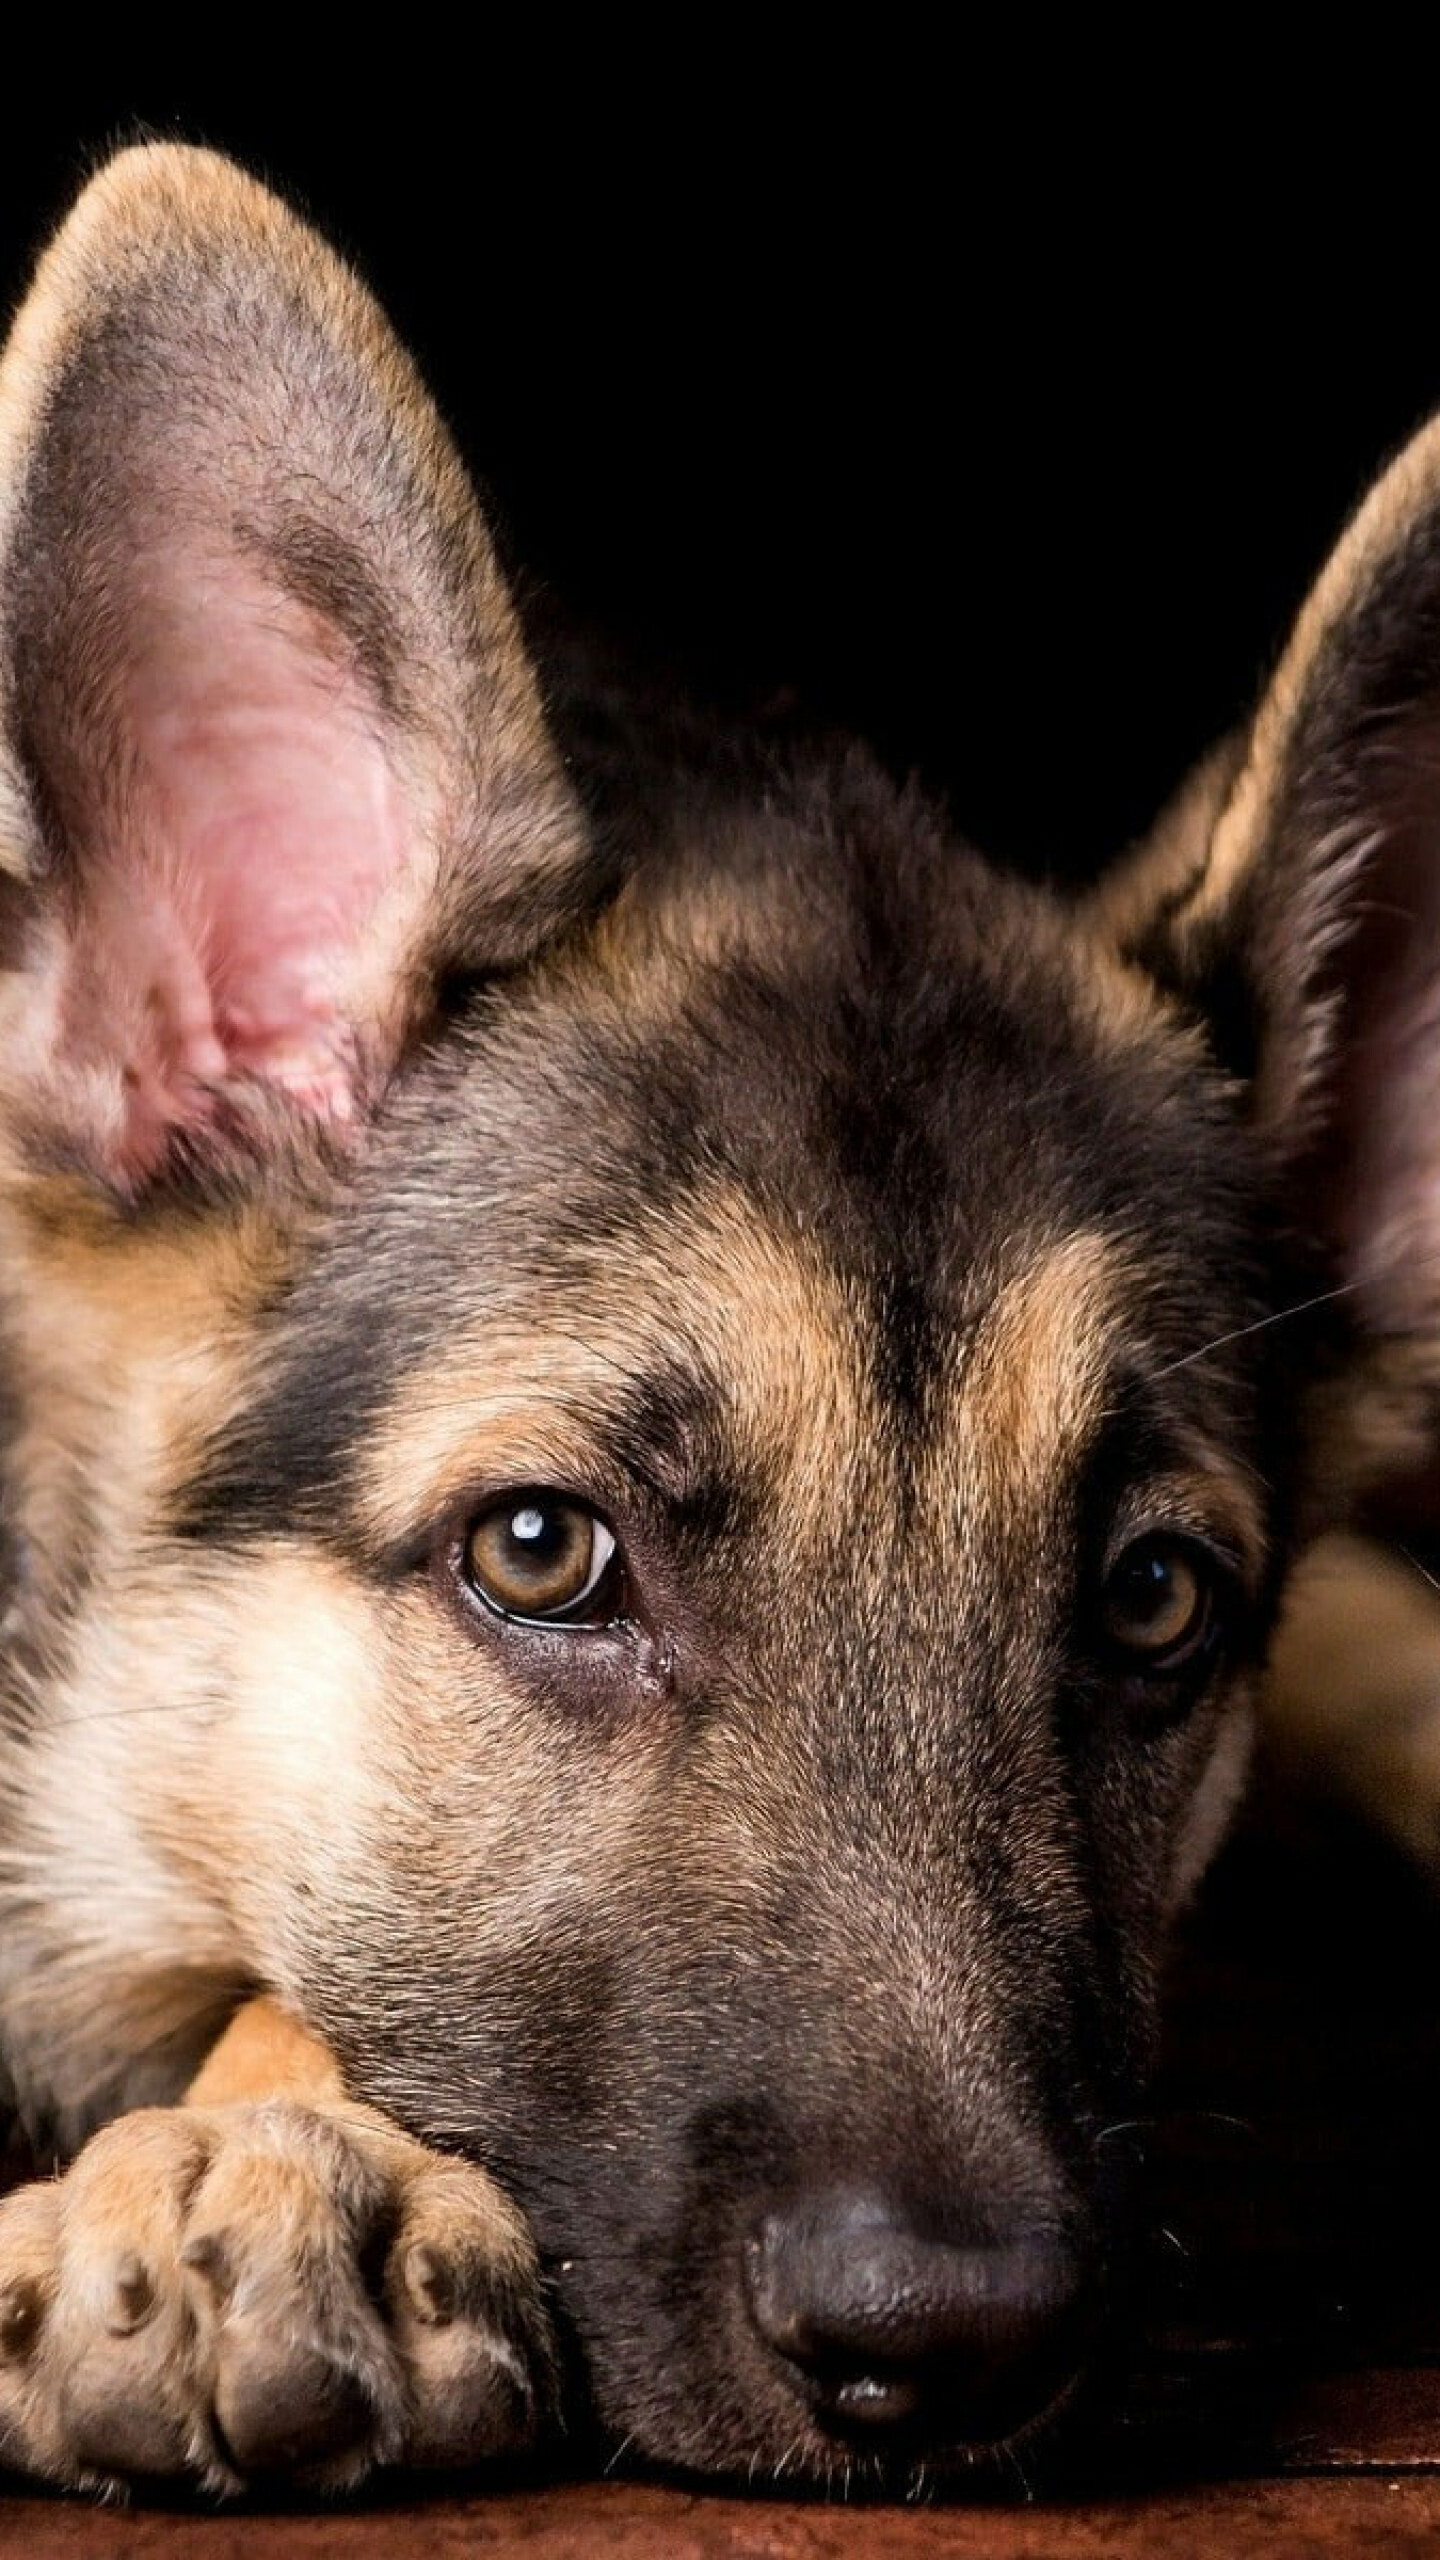 German Shepherd: Moderately active dogs and are described in breed standards as self-assured, Animals. 1440x2560 HD Wallpaper.